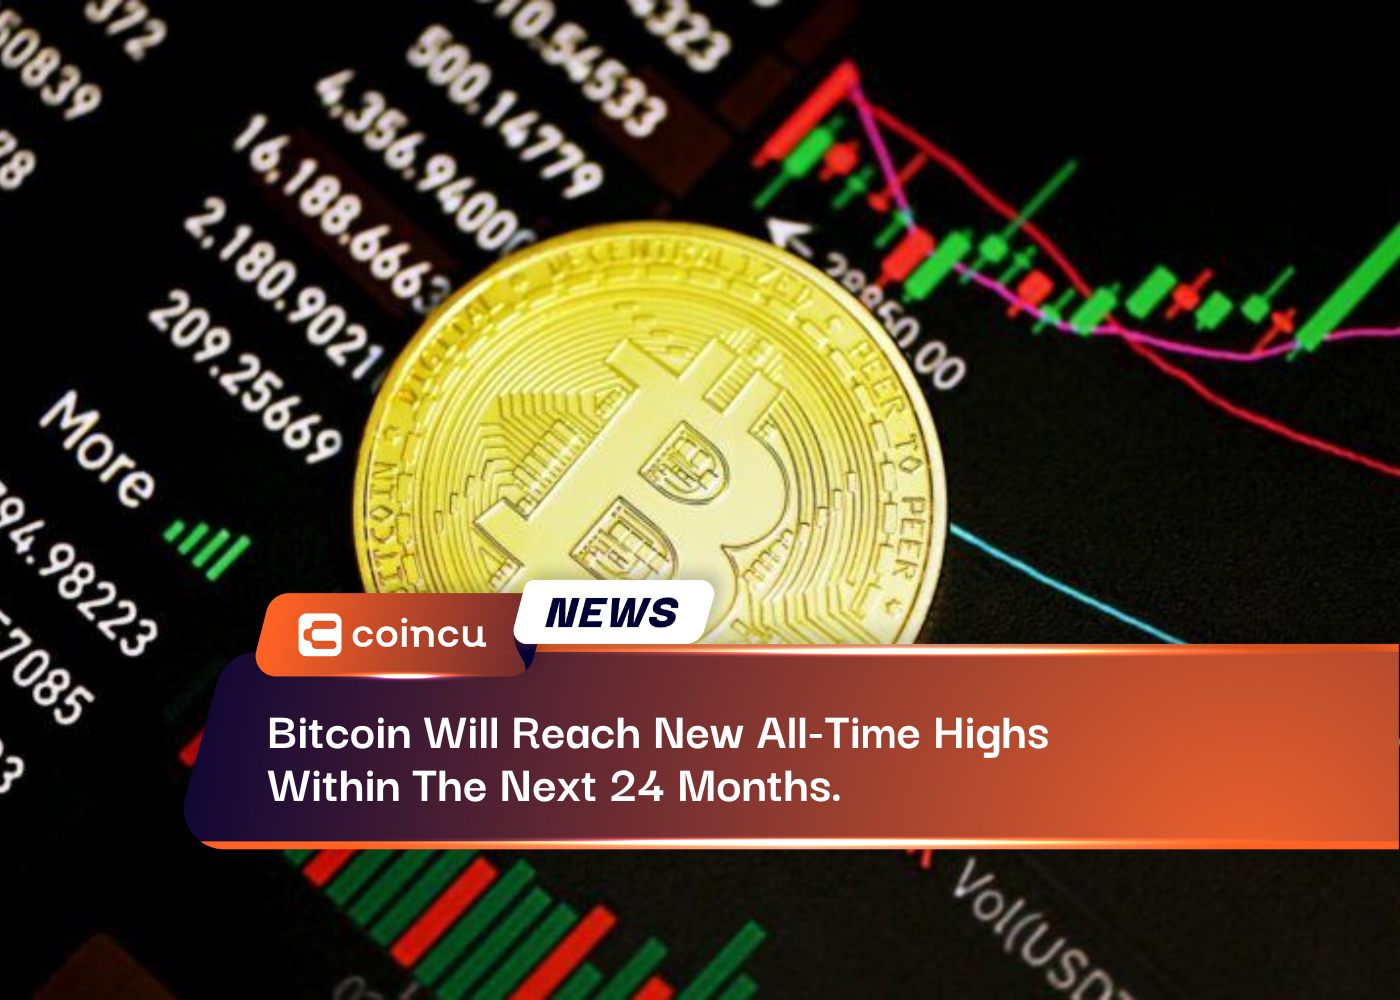 Bitcoin Will Reach New All-Time Highs Within The Next 24 Months.